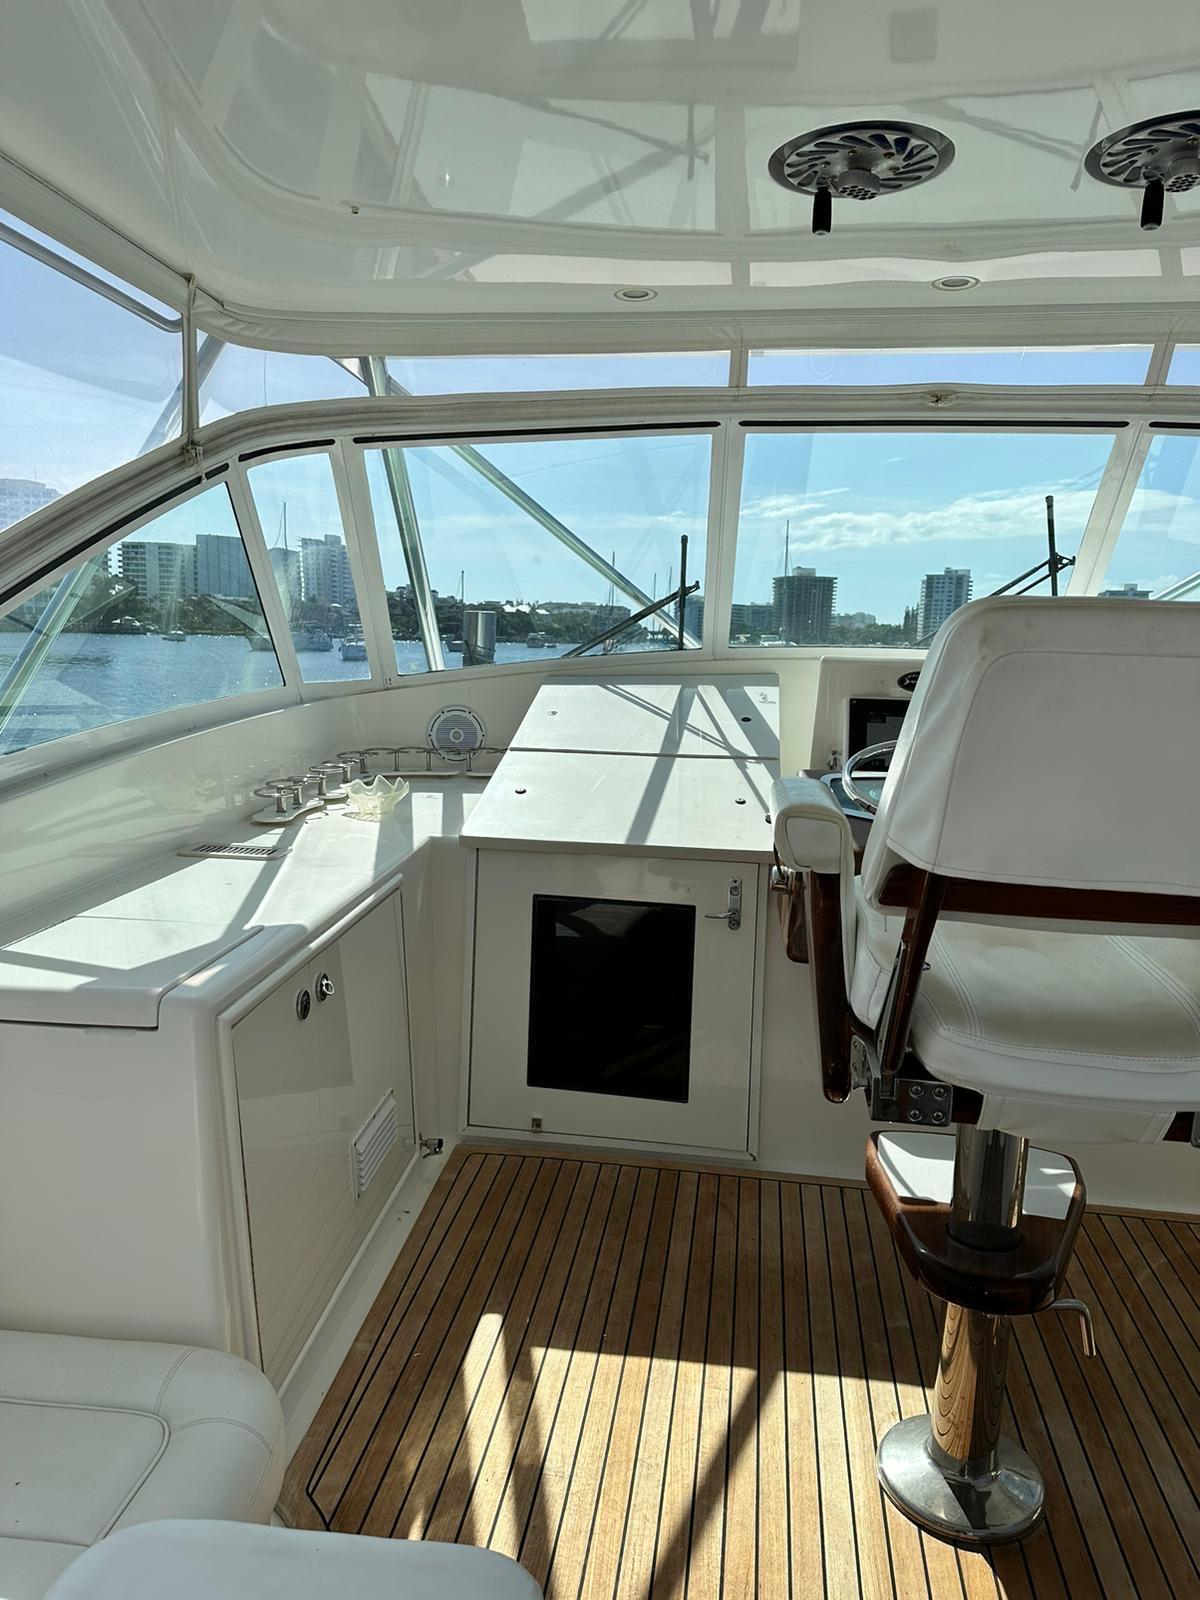 SEA BUDDY Yacht for Sale in Fort Lauderdale